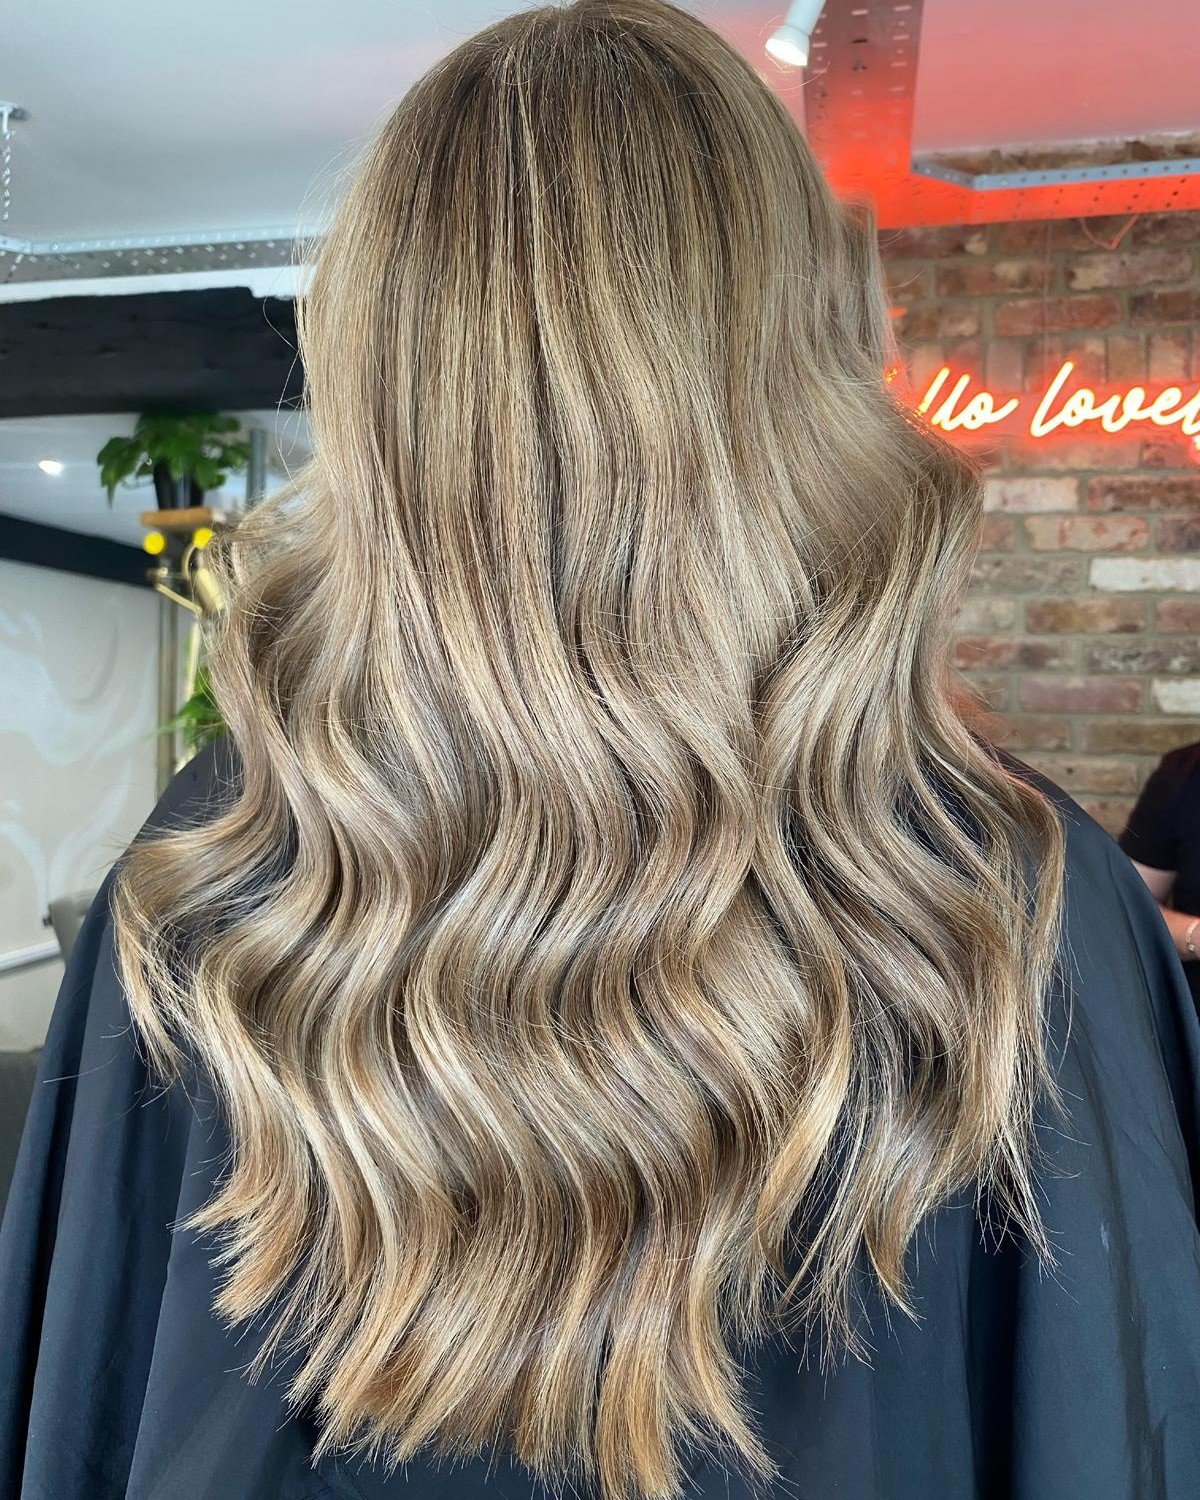 From blonde 👉 beautiful bronde 💛🤎

Highlights and lowlights, root melt, toner finished with a cut and style by the amazing @hairbymadisonmear_ 🙌

📞 01903 205721
🖥️ joshualukes.co.uk

.
.
.

#hair #wella #wellacolour #wellahair #wellaprofessiona